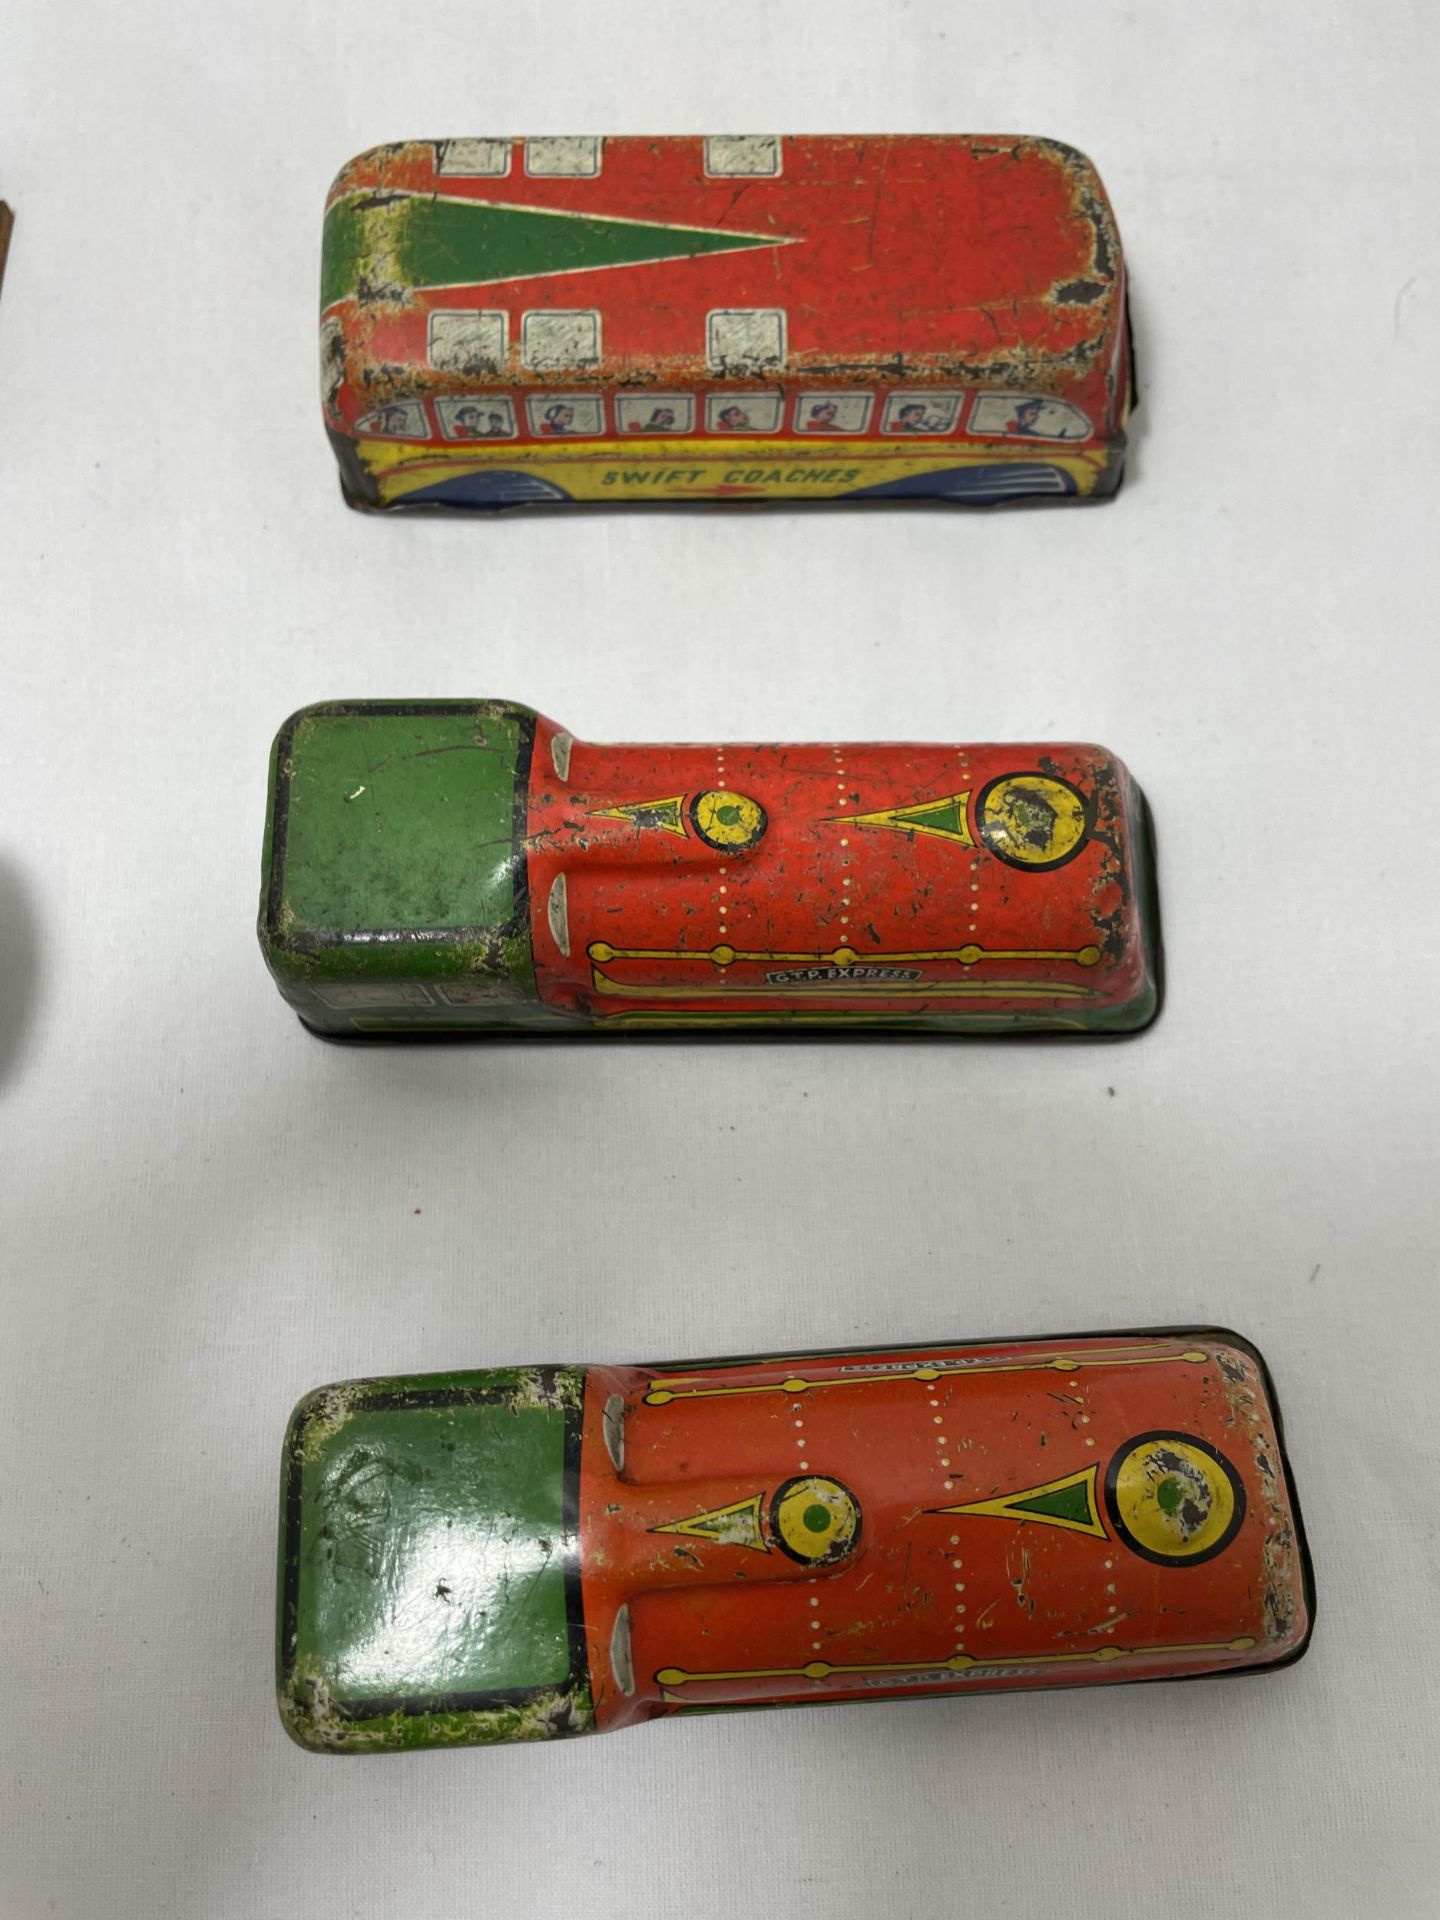 A QUANTITY OF VINTAGE TIN PLATE AND PLASTIC, FRICTION DRIVEN TOY VEHICLES FROM THE 1950'S/60'S - Image 2 of 5